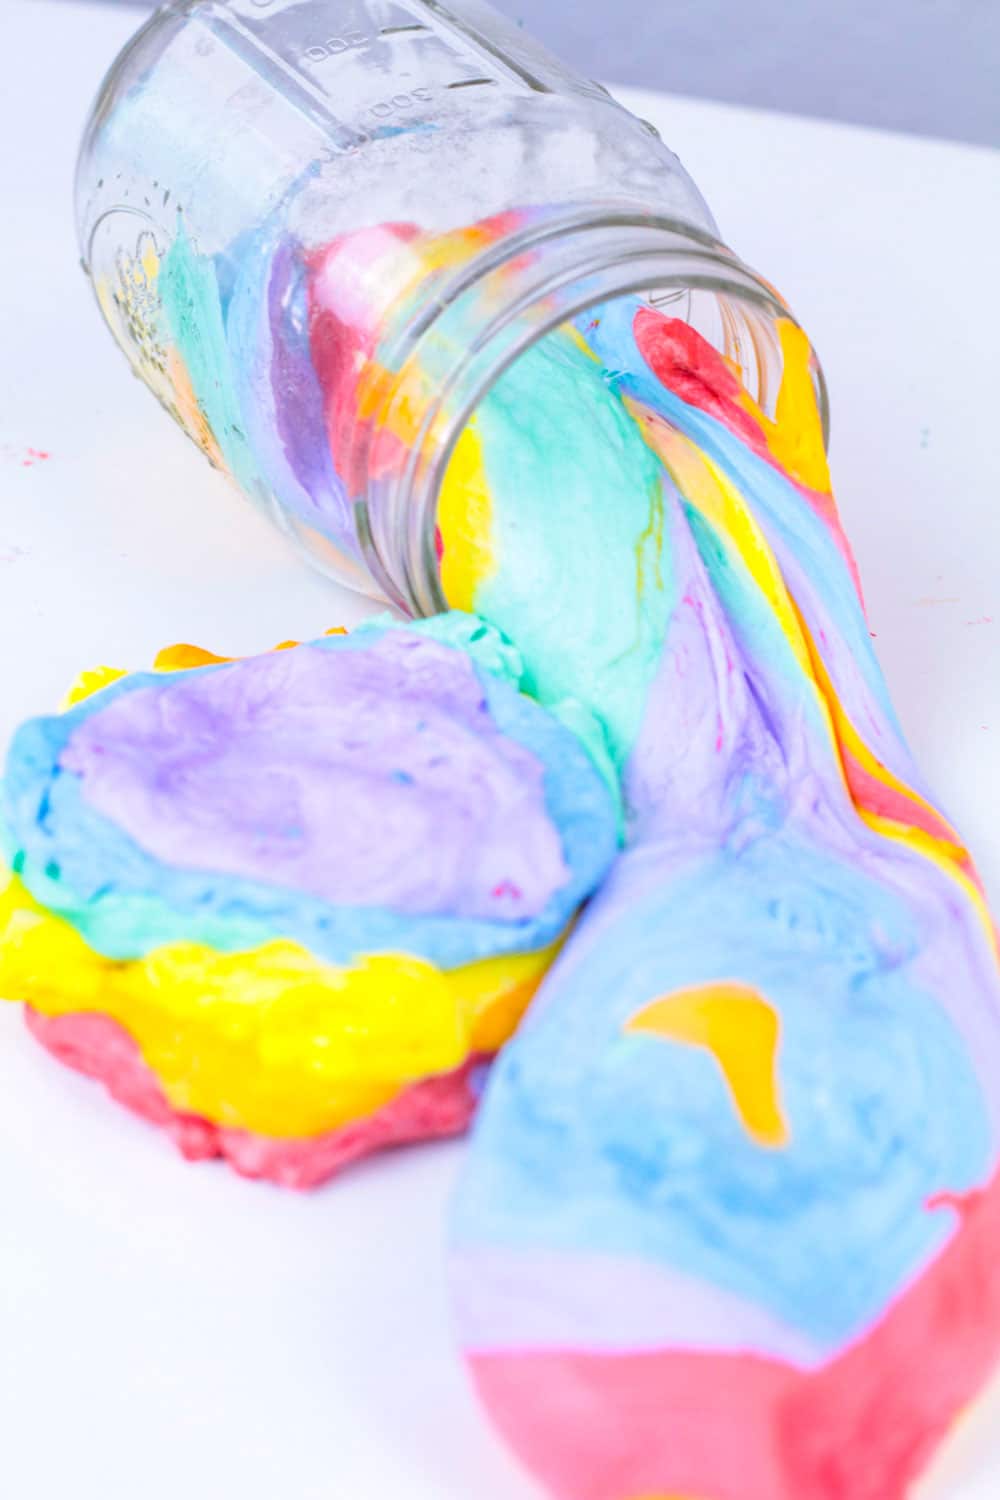 Slime lovers will adore this fluffy version of rainbow slime! This fluffy rainbow slime recipe is super easy to make and it's less messy than many other slime recipes out there. Rainbow slime that is fluffy is fun and you'll learn how to make fluffy rainbow slime in no time!